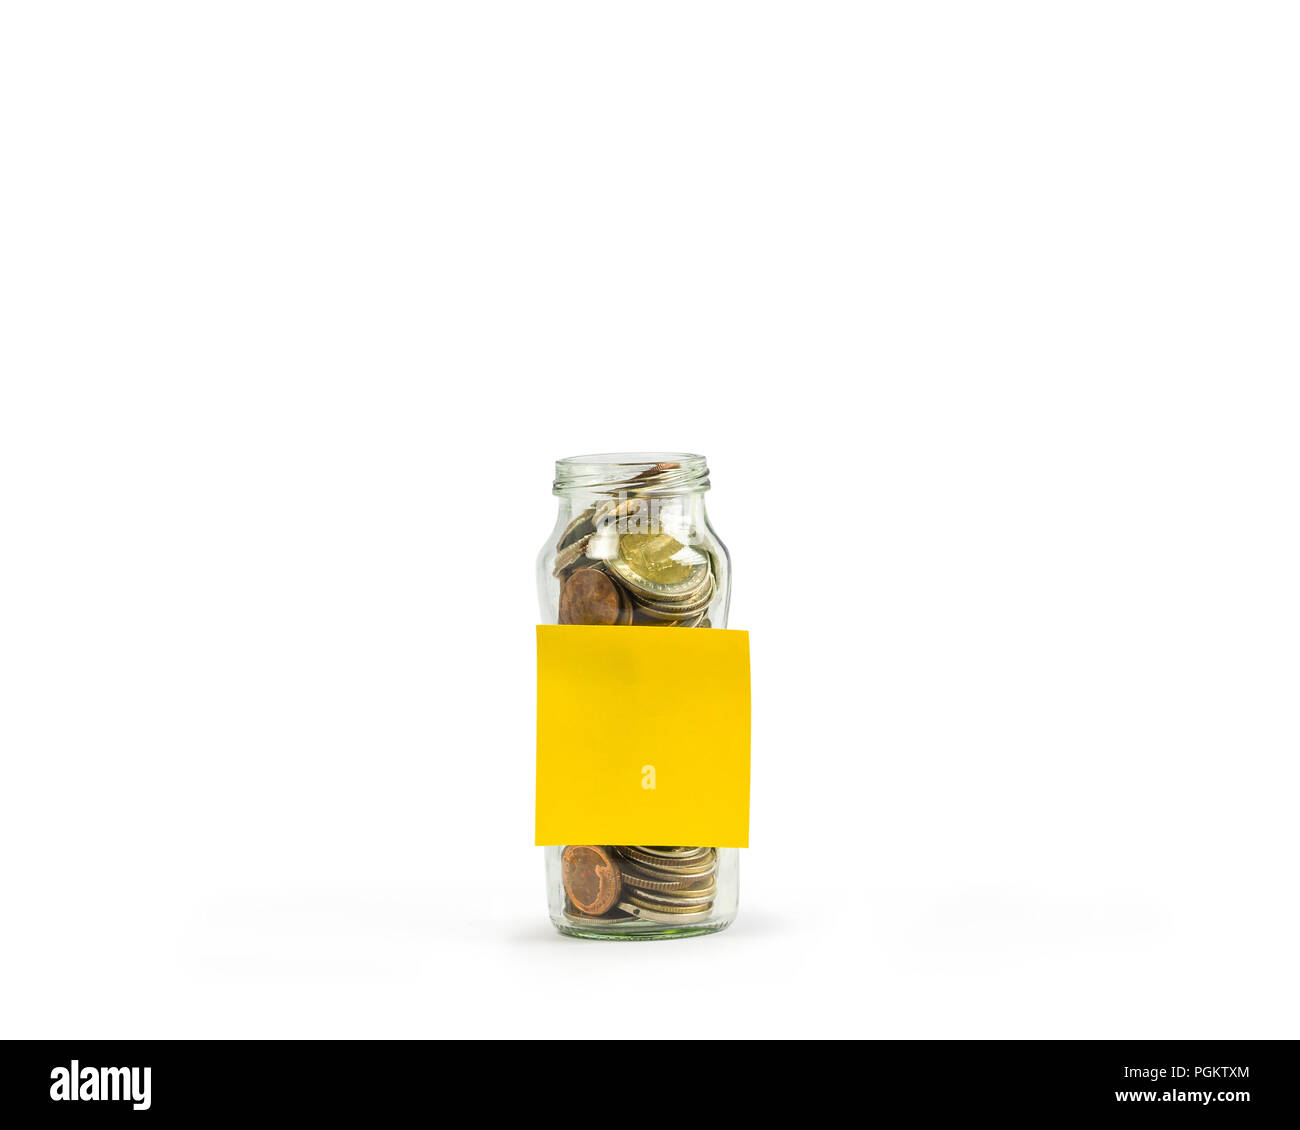 Savings, Investment growing money concept : A full coins in a clear glass jar with a empty yellow post paper on white background include clipping path Stock Photo